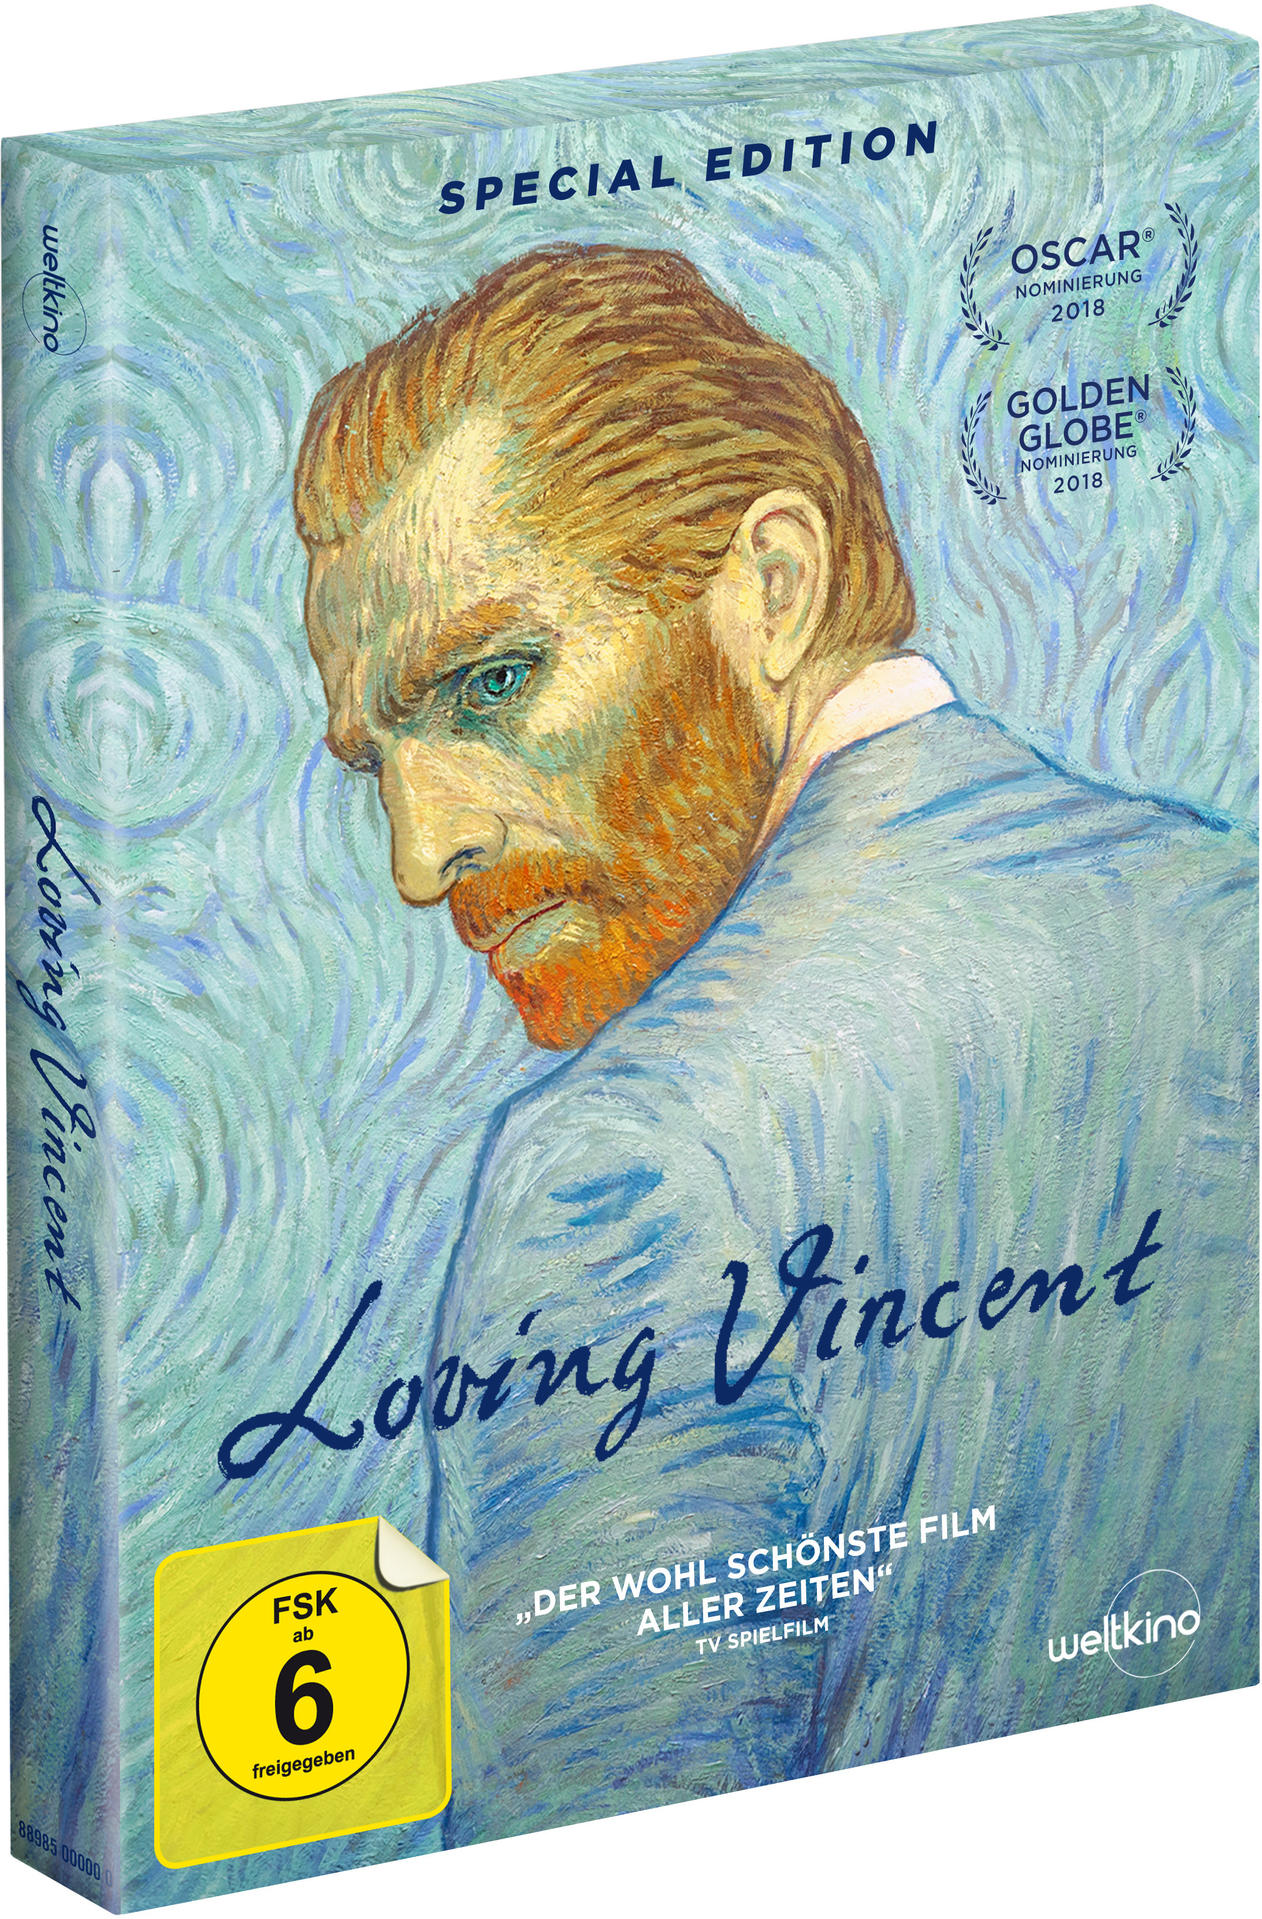 DVD CD (Limited Loving Vincent Special + Edition)